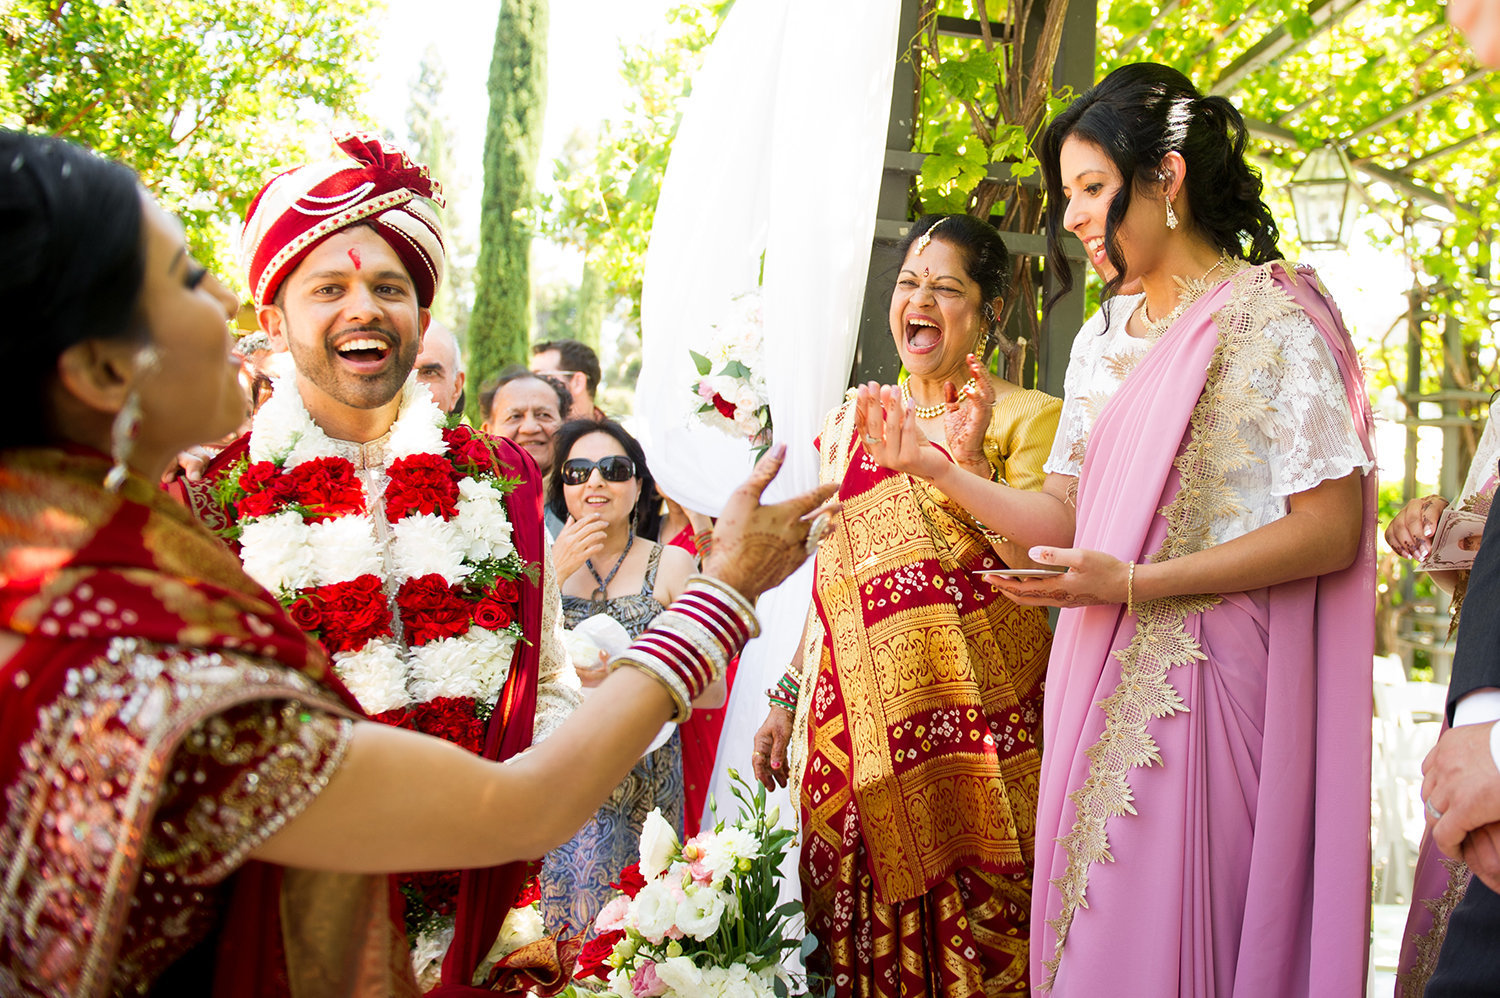 The groom bargains with bridesmaids to get his shoes back after a traditional hindu wedding ceremony